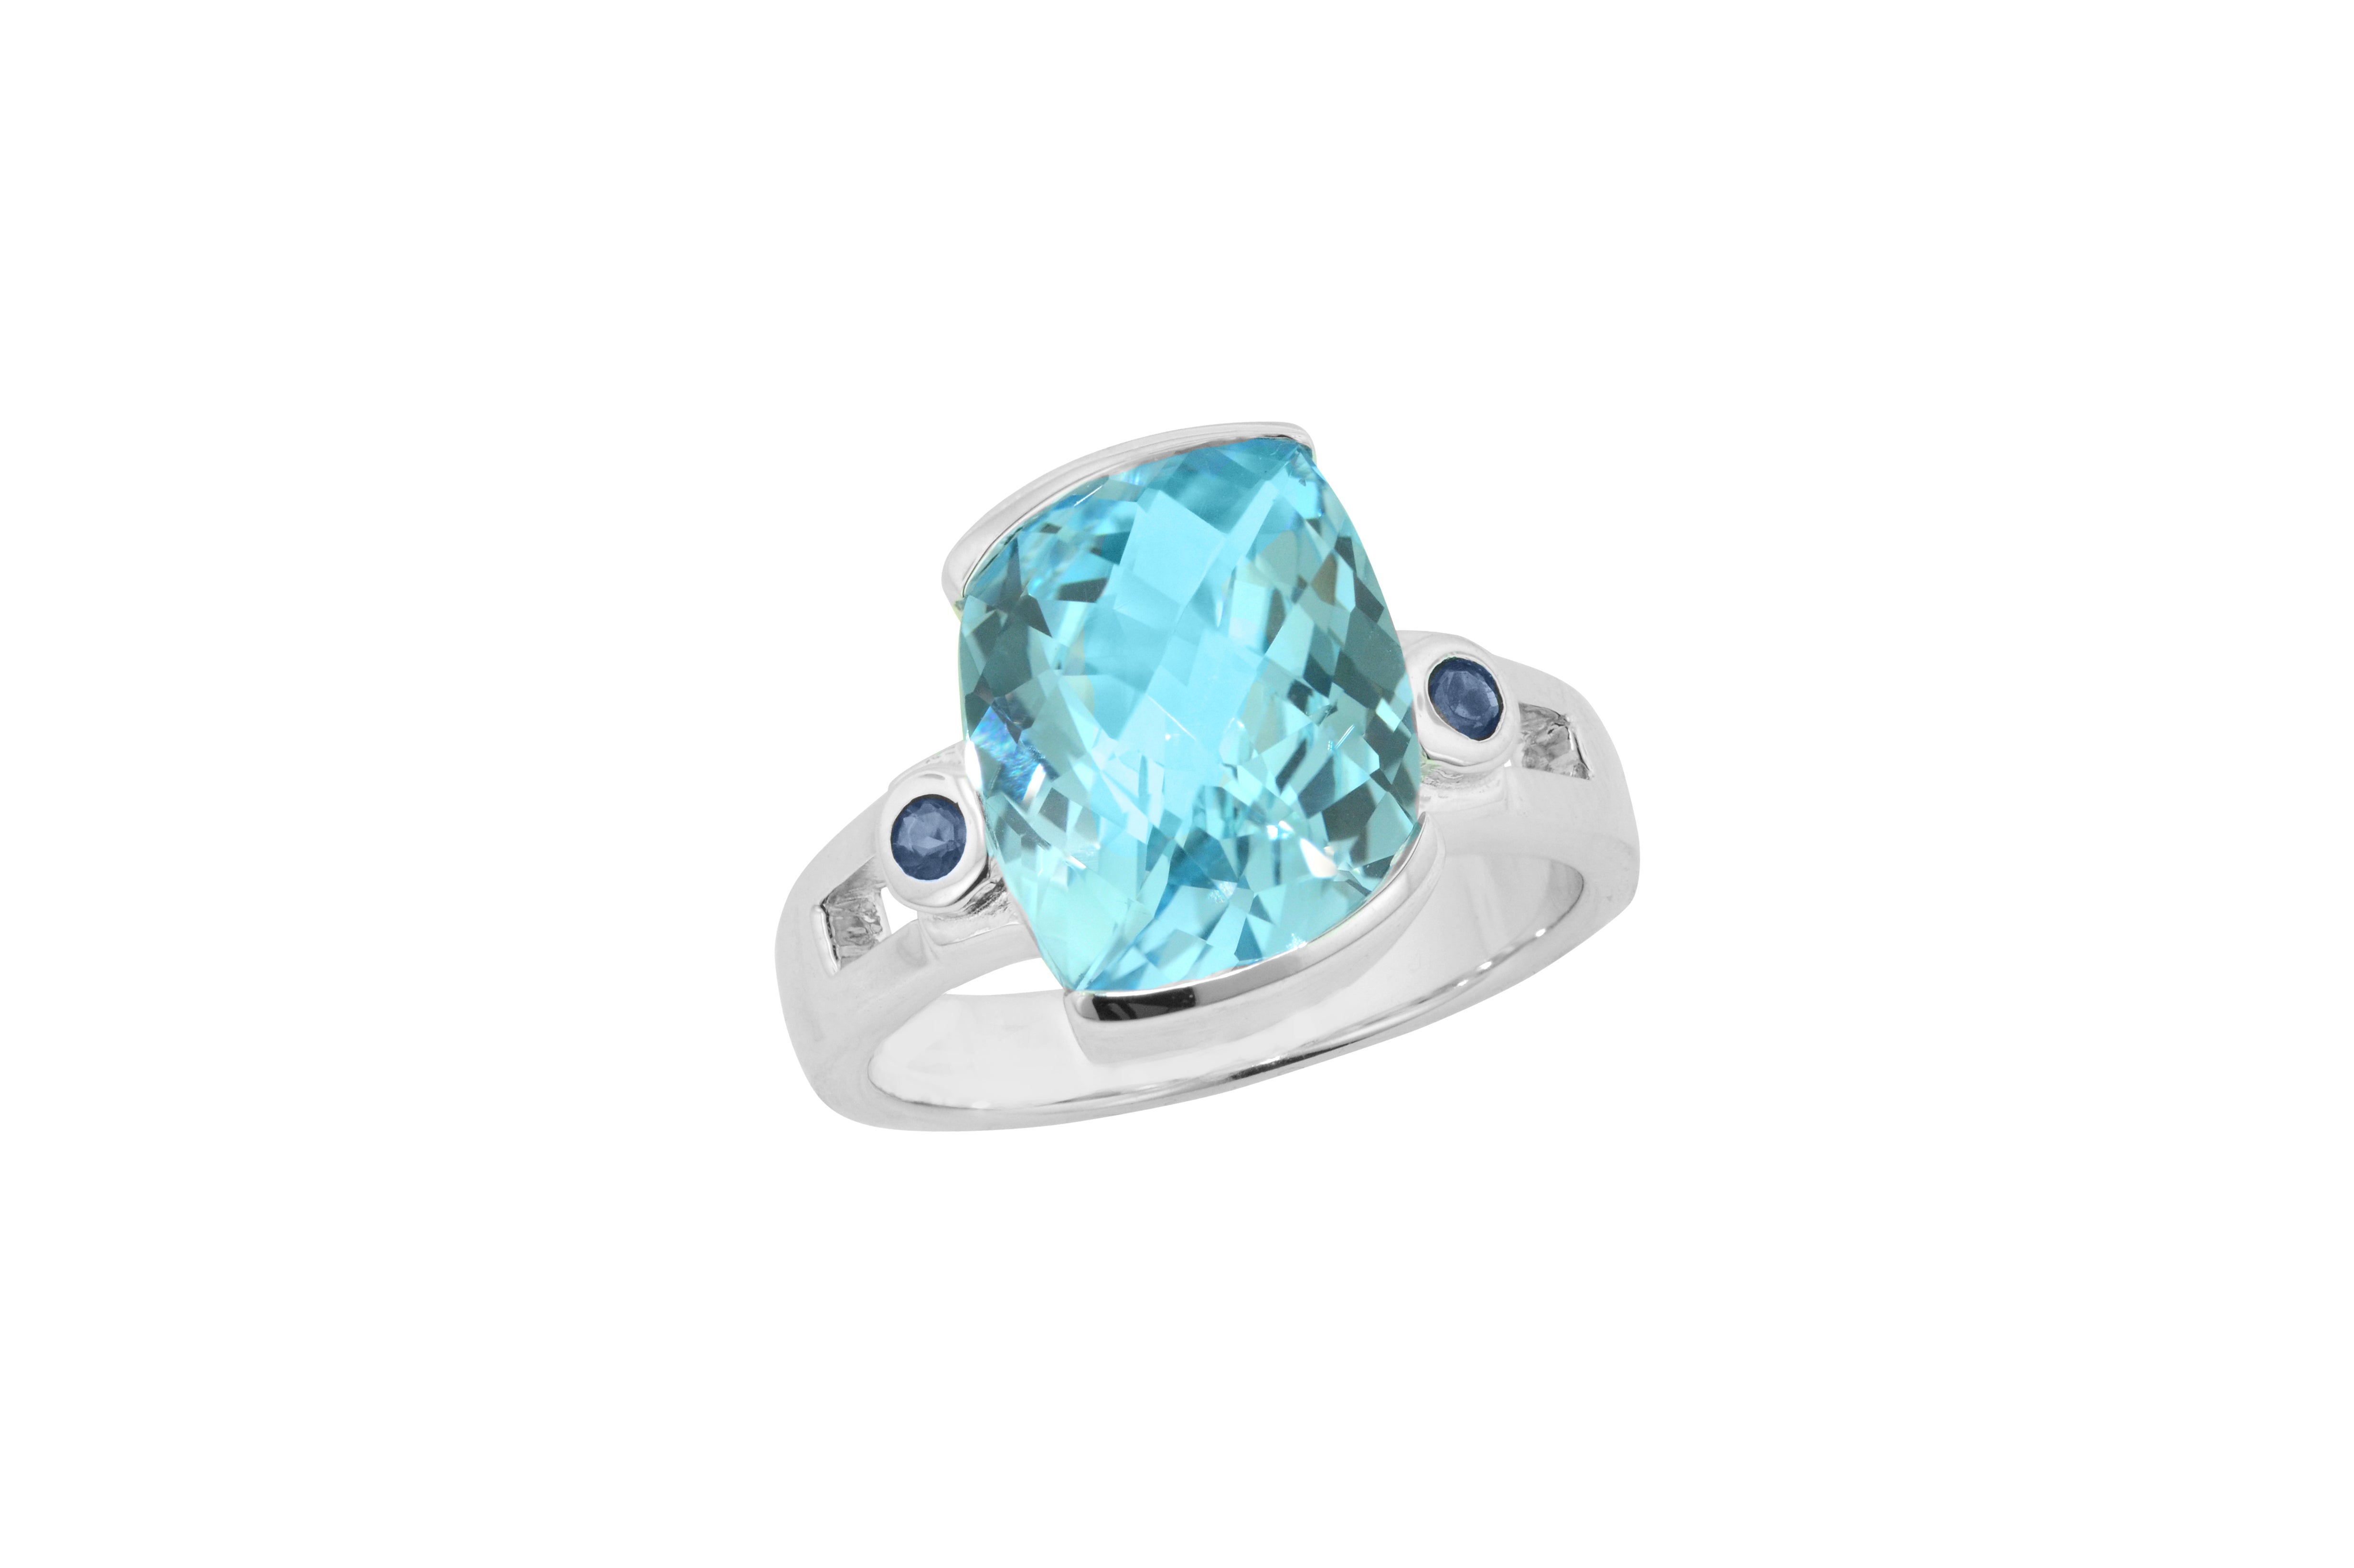 Ocean-Themed Sterling Silver Ring with Faceted Blue Topaz - Marine